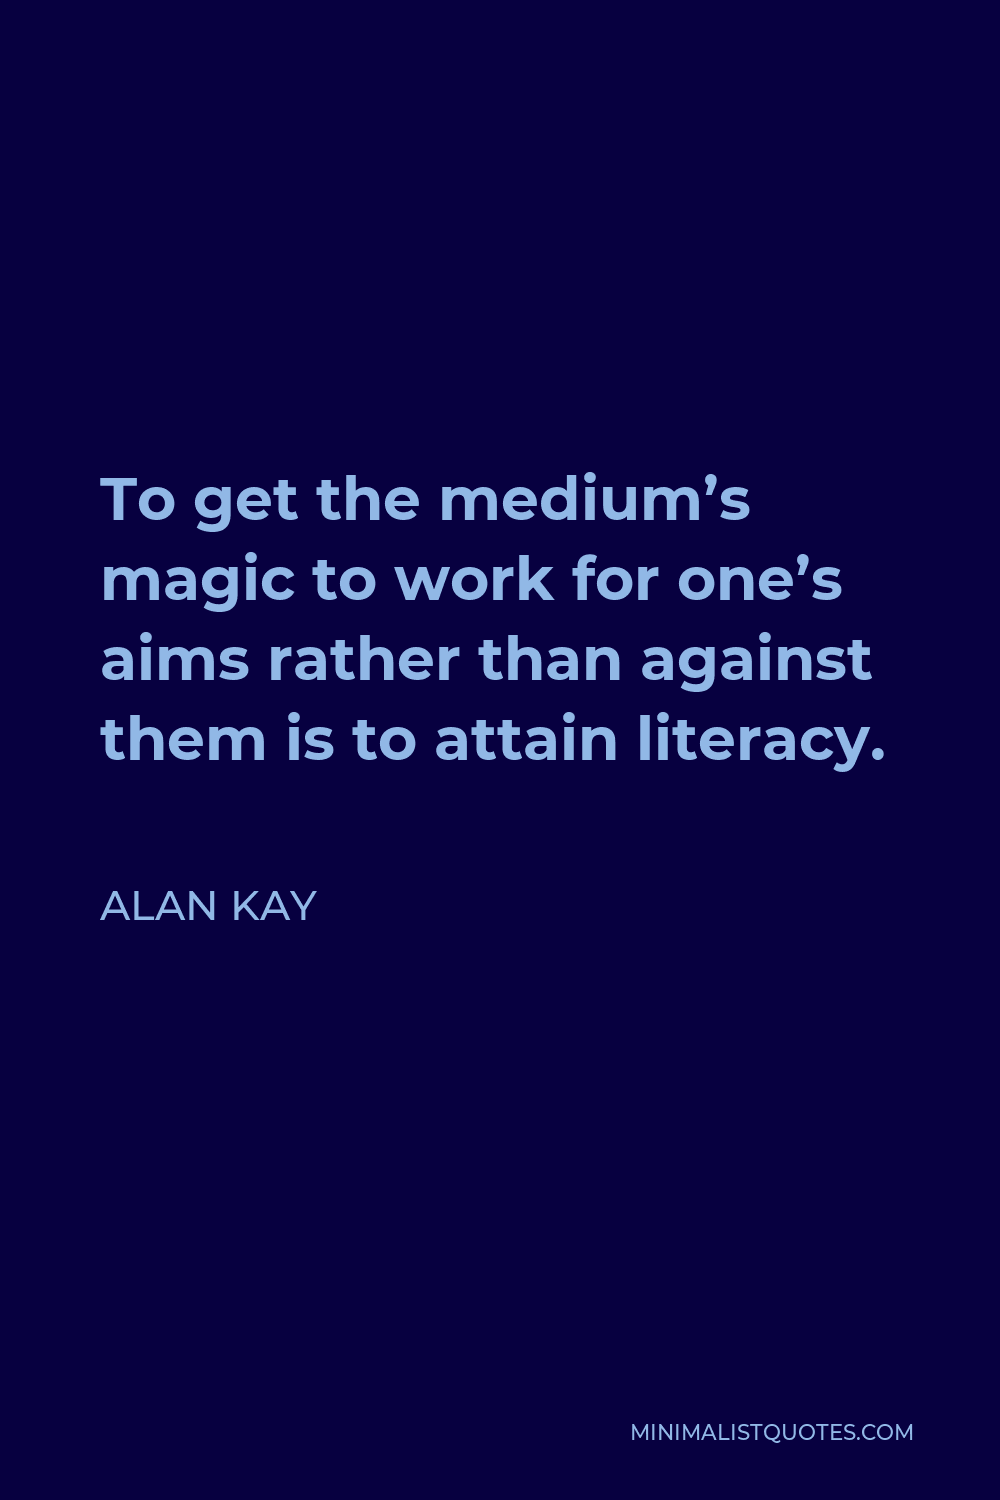 Alan Kay Quote - To get the medium’s magic to work for one’s aims rather than against them is to attain literacy.